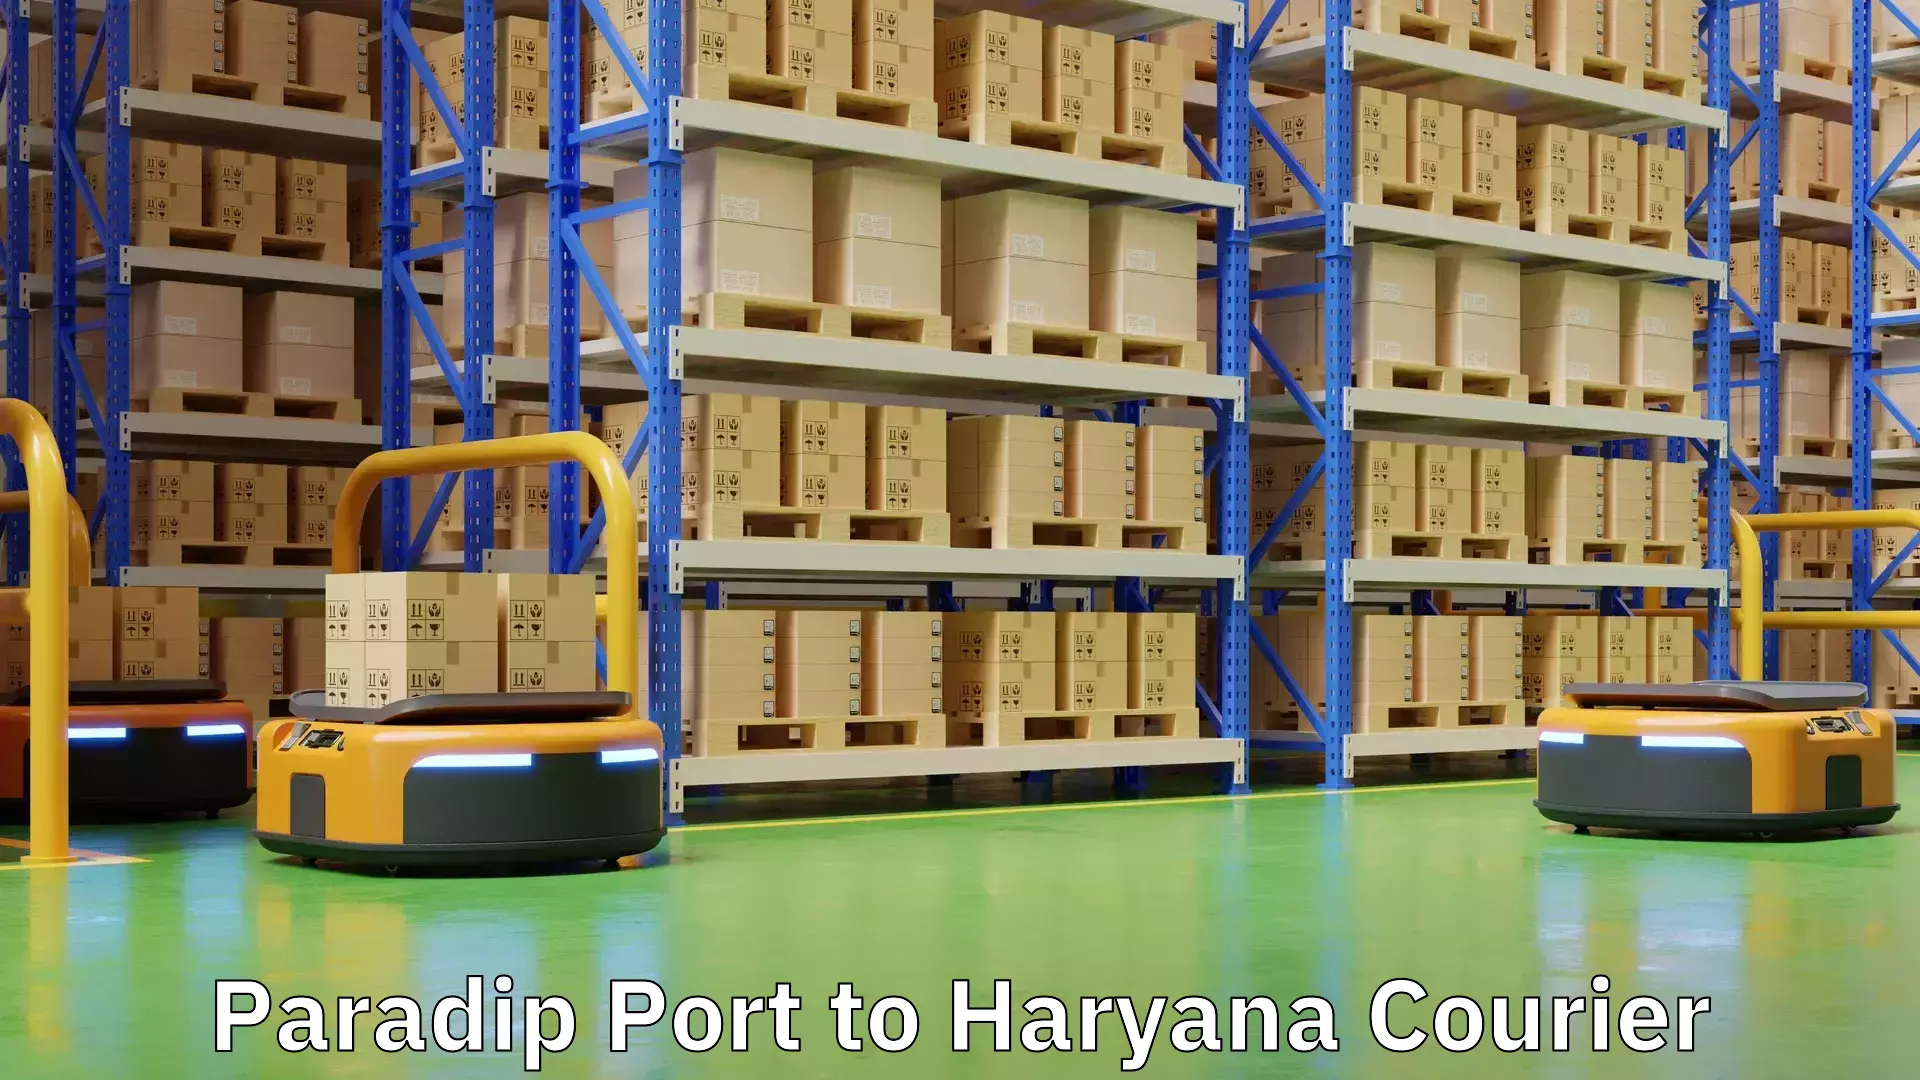 Affordable parcel service Paradip Port to Haryana